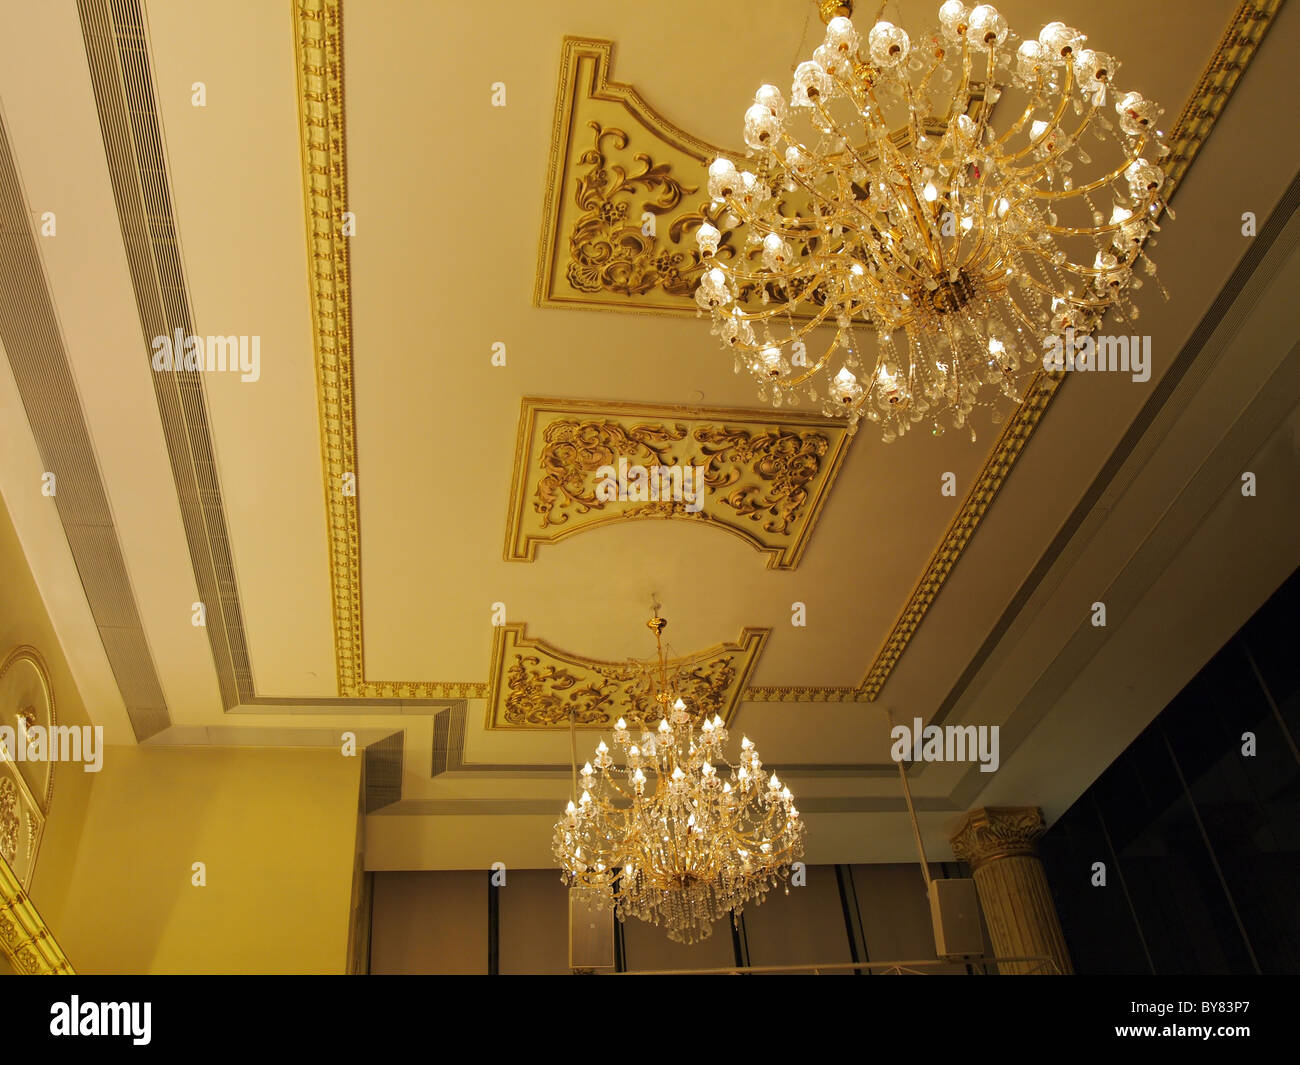 Elegance Chandelier hanging at ceiling Stock Photo